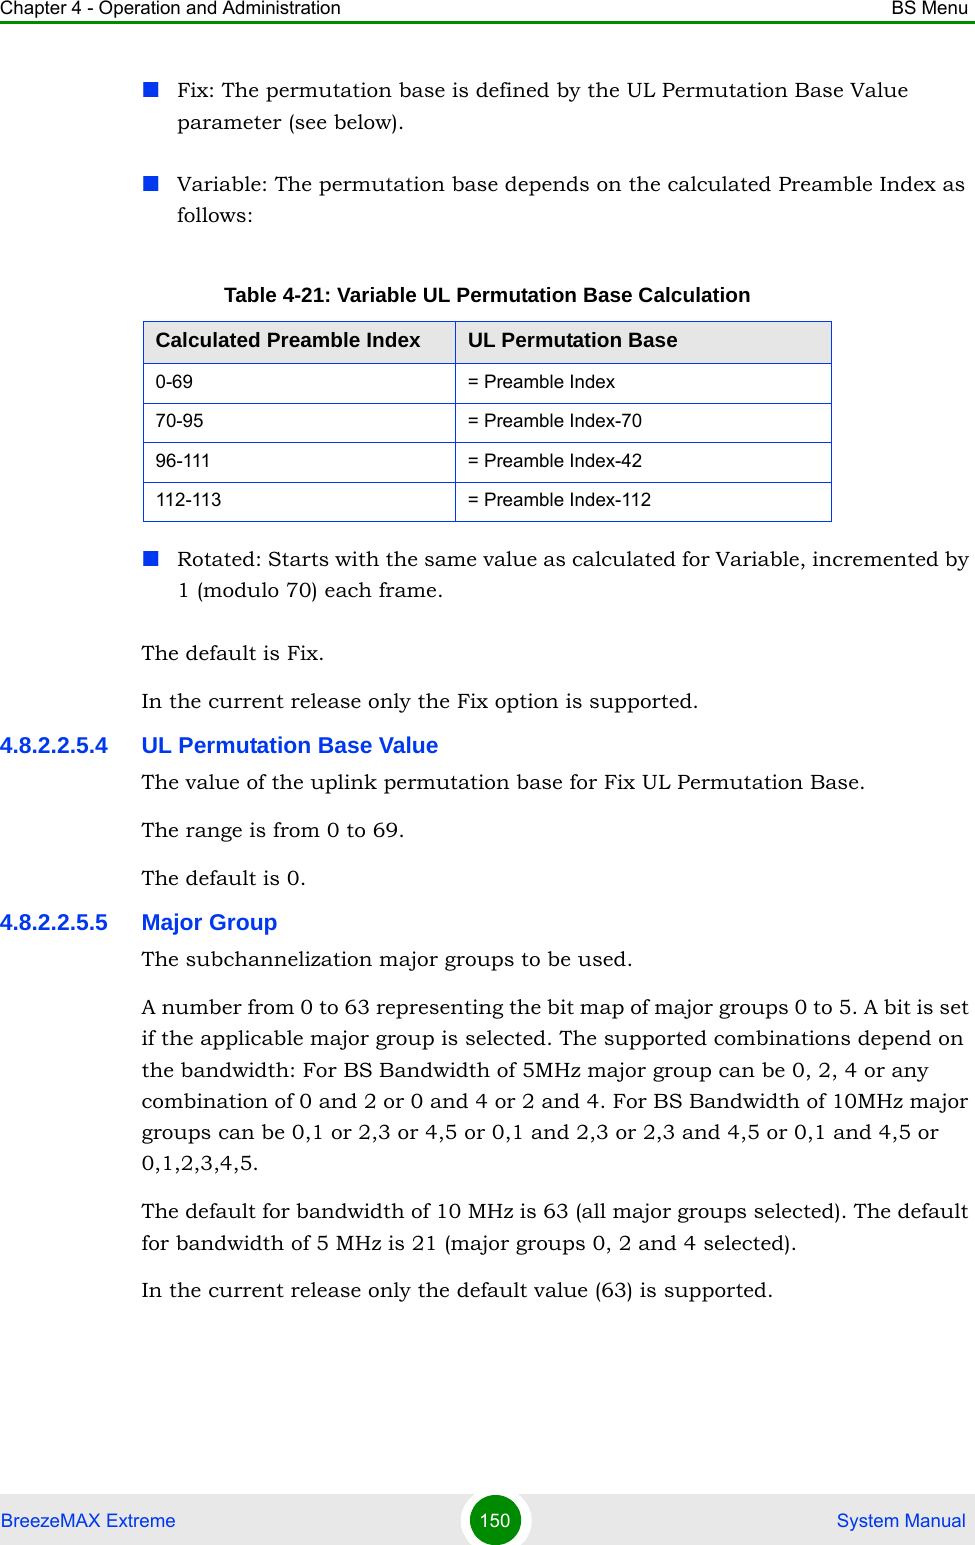 Chapter 4 - Operation and Administration BS MenuBreezeMAX Extreme 150  System ManualFix: The permutation base is defined by the UL Permutation Base Value parameter (see below).Variable: The permutation base depends on the calculated Preamble Index as follows:Rotated: Starts with the same value as calculated for Variable, incremented by 1 (modulo 70) each frame.The default is Fix.In the current release only the Fix option is supported.4.8.2.2.5.4 UL Permutation Base ValueThe value of the uplink permutation base for Fix UL Permutation Base.The range is from 0 to 69.The default is 0.4.8.2.2.5.5 Major GroupThe subchannelization major groups to be used.A number from 0 to 63 representing the bit map of major groups 0 to 5. A bit is set if the applicable major group is selected. The supported combinations depend on the bandwidth: For BS Bandwidth of 5MHz major group can be 0, 2, 4 or any combination of 0 and 2 or 0 and 4 or 2 and 4. For BS Bandwidth of 10MHz major groups can be 0,1 or 2,3 or 4,5 or 0,1 and 2,3 or 2,3 and 4,5 or 0,1 and 4,5 or 0,1,2,3,4,5.The default for bandwidth of 10 MHz is 63 (all major groups selected). The default for bandwidth of 5 MHz is 21 (major groups 0, 2 and 4 selected).In the current release only the default value (63) is supported.Table 4-21: Variable UL Permutation Base CalculationCalculated Preamble Index UL Permutation Base0-69 = Preamble Index70-95 = Preamble Index-7096-111 = Preamble Index-42112-113 = Preamble Index-112